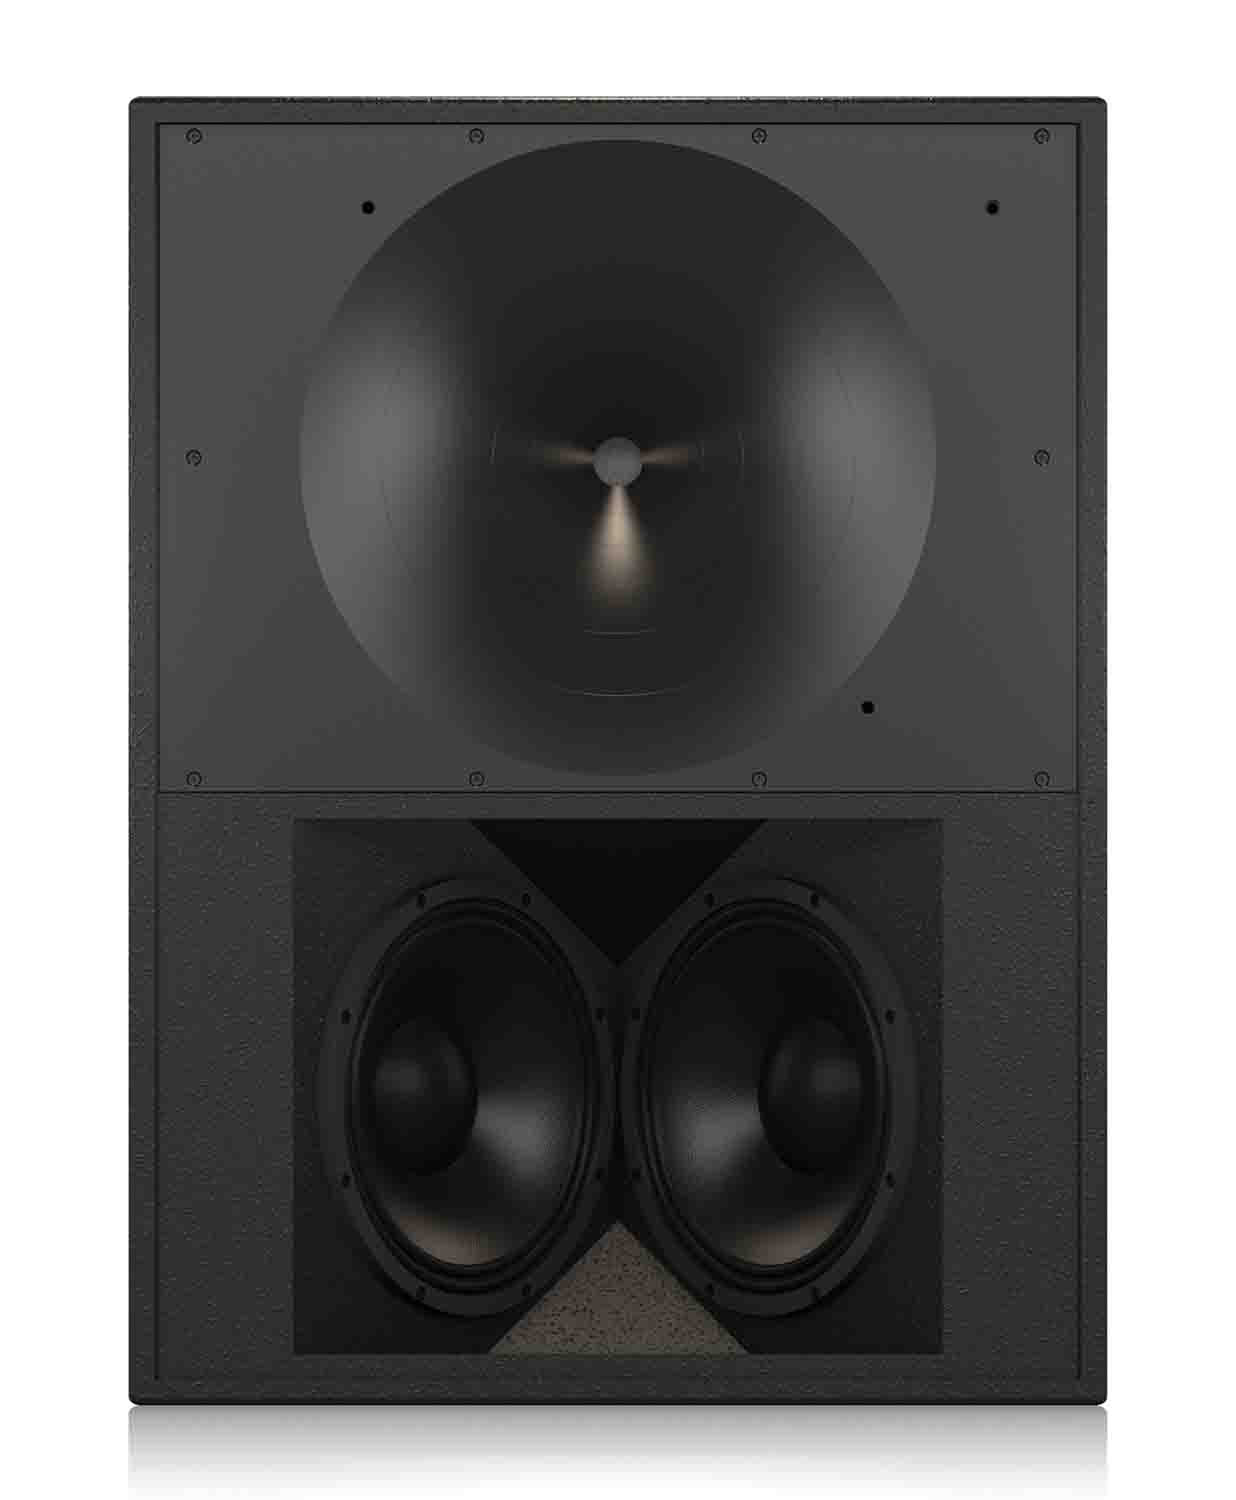 Tannoy VQ 100 High-Performance 3-Way Dual 12-Inch Large Format Loudspeaker - Hollywood DJ